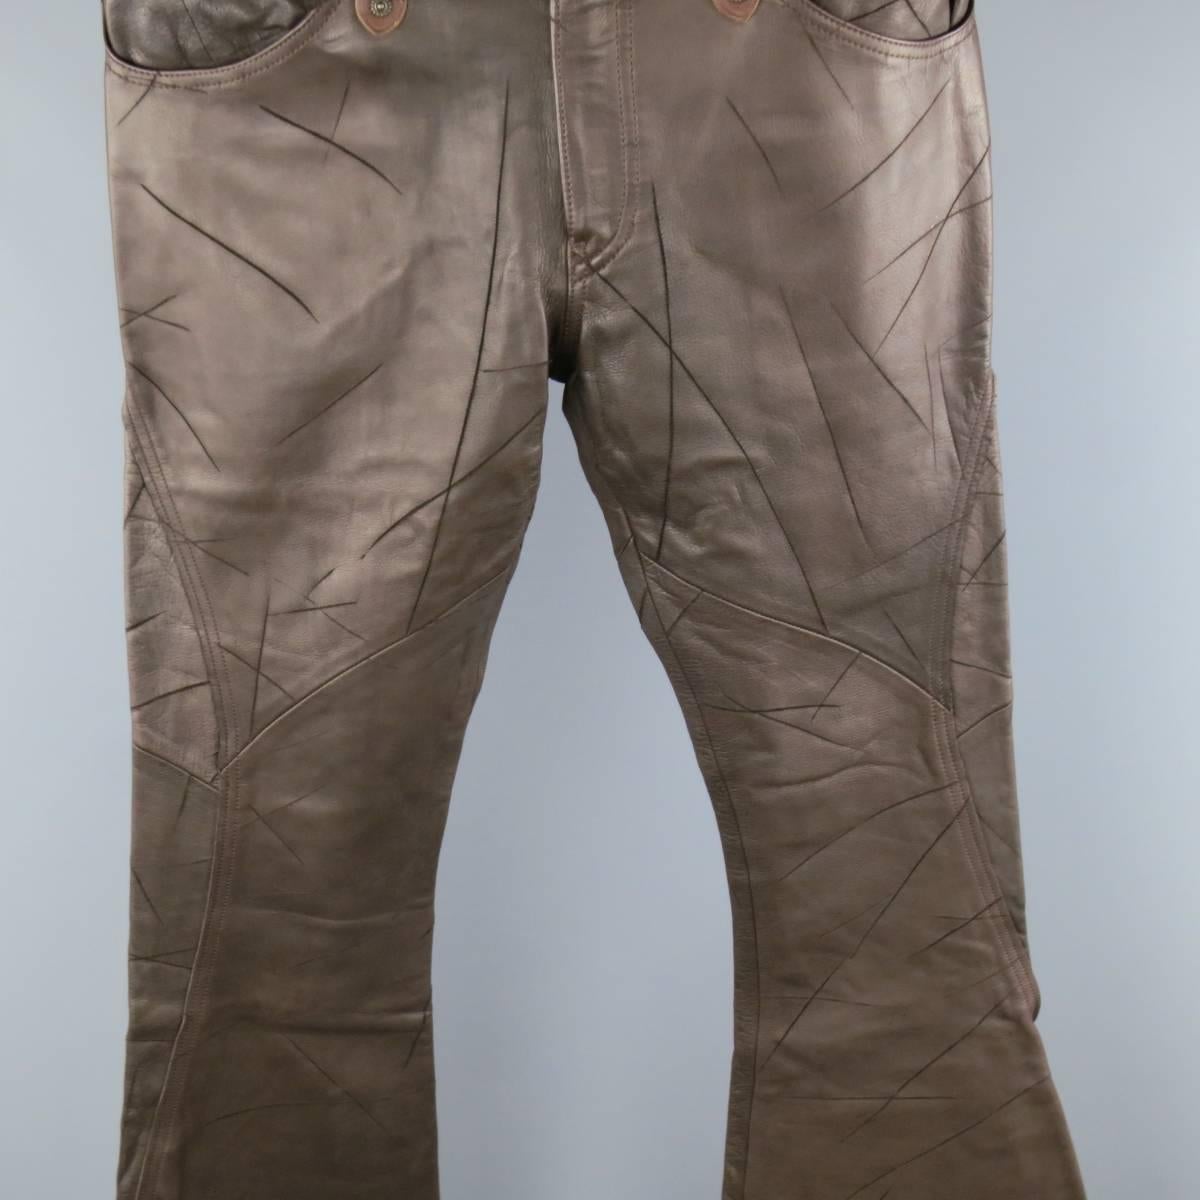 OBELISK Casual Pants consists of 100% leather material in a brown color tone. Designed with a zip-fly, button closure, side quarter pocket. Western style. Detailed cuts throughout legs with light brown trim. Wear throughout. Faint odor. As-Is. Made